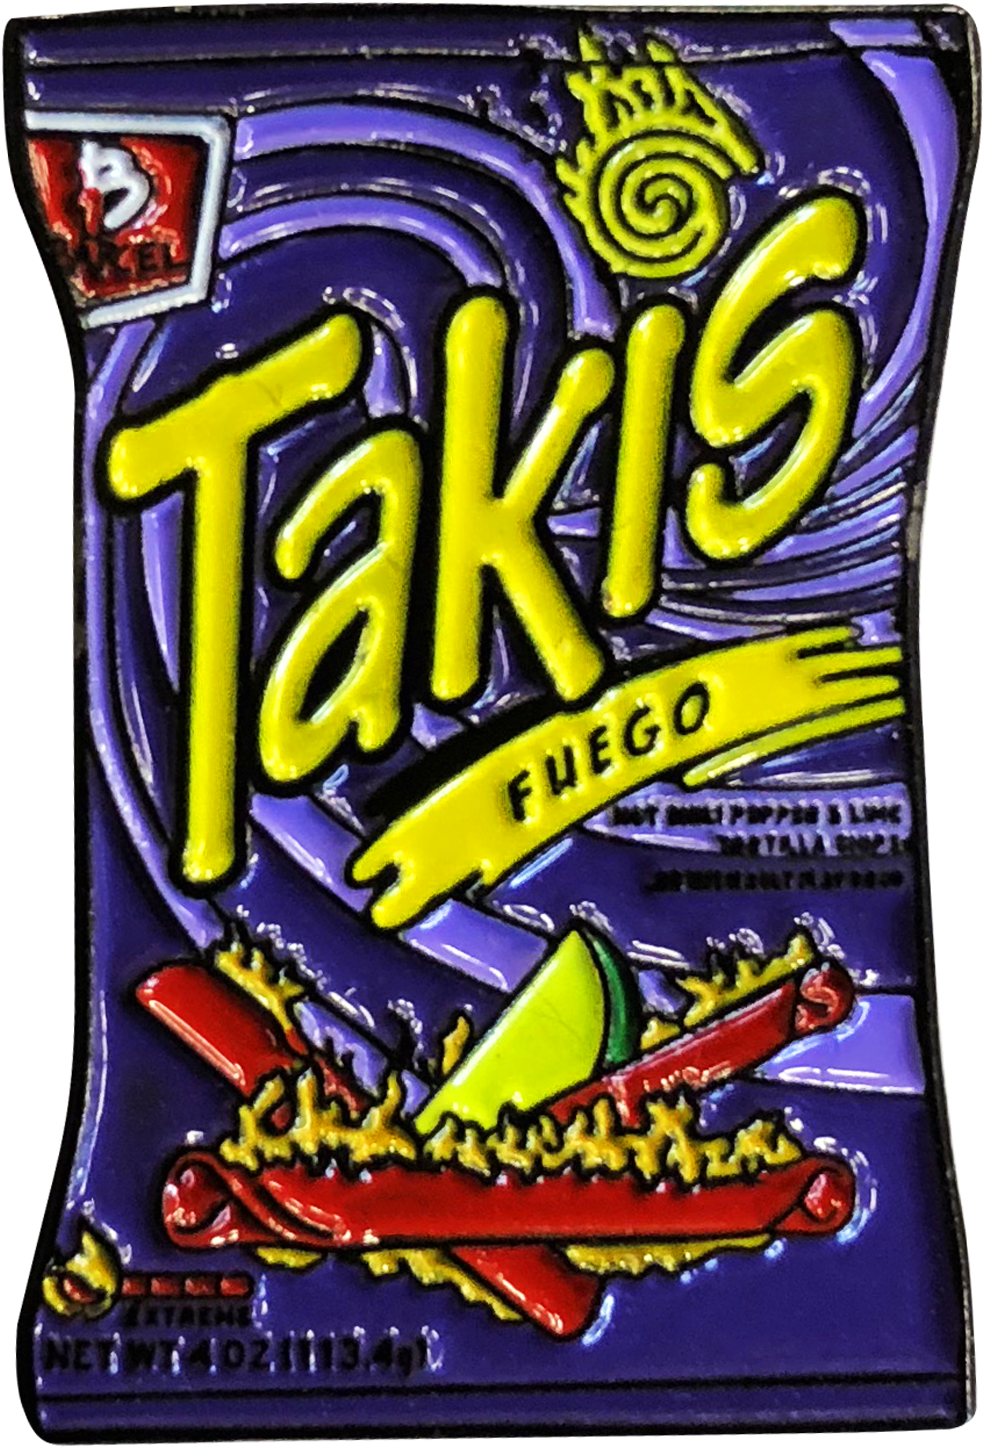 Takis Fuego Snack Package